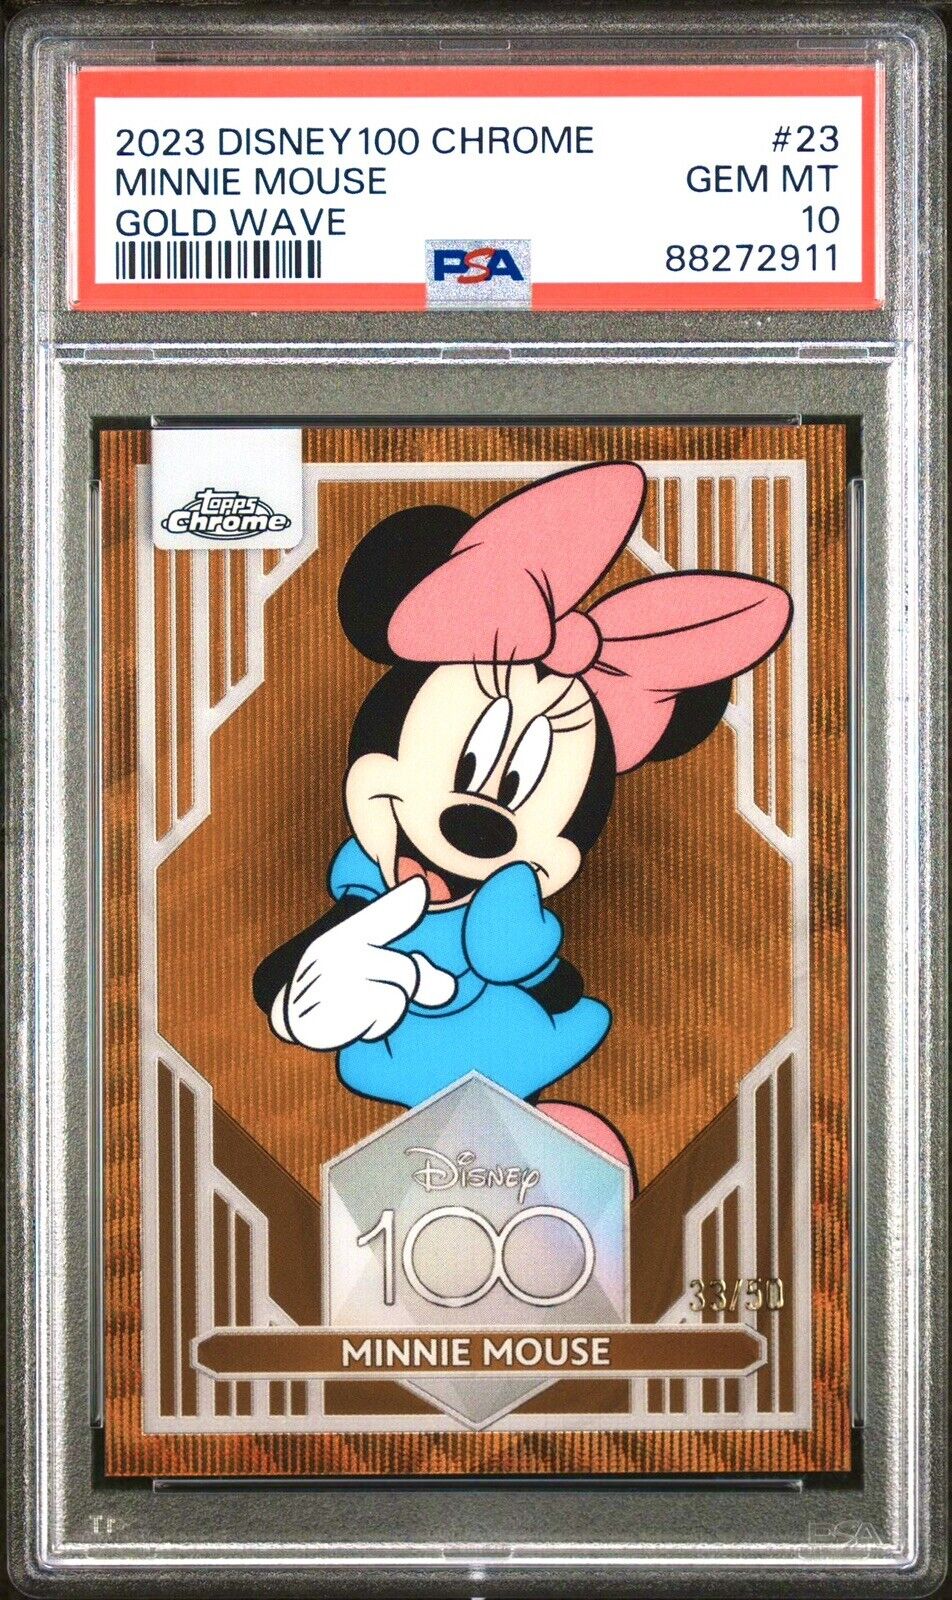 2023 Topps Chrome Disney 100 Gold Wave Refractor #23 Minnie Mouse /50 PSA 10